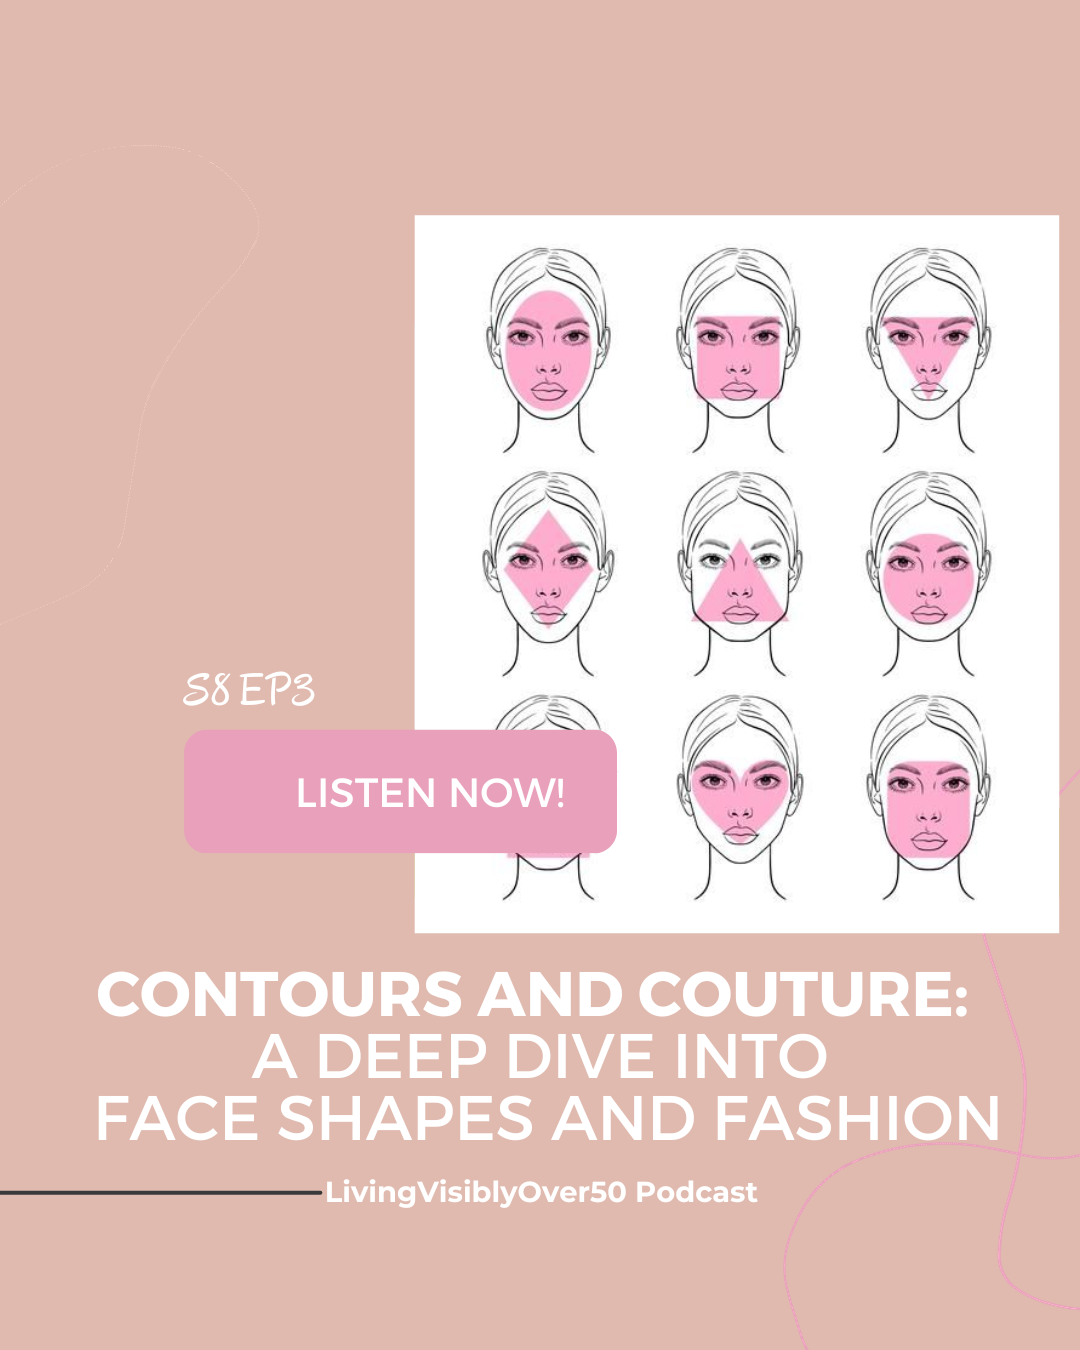  Living Visibly Over 50 podcast. S8 Ep3 Contours and Couture: A Deep Dive into Face Shapes and Fashion